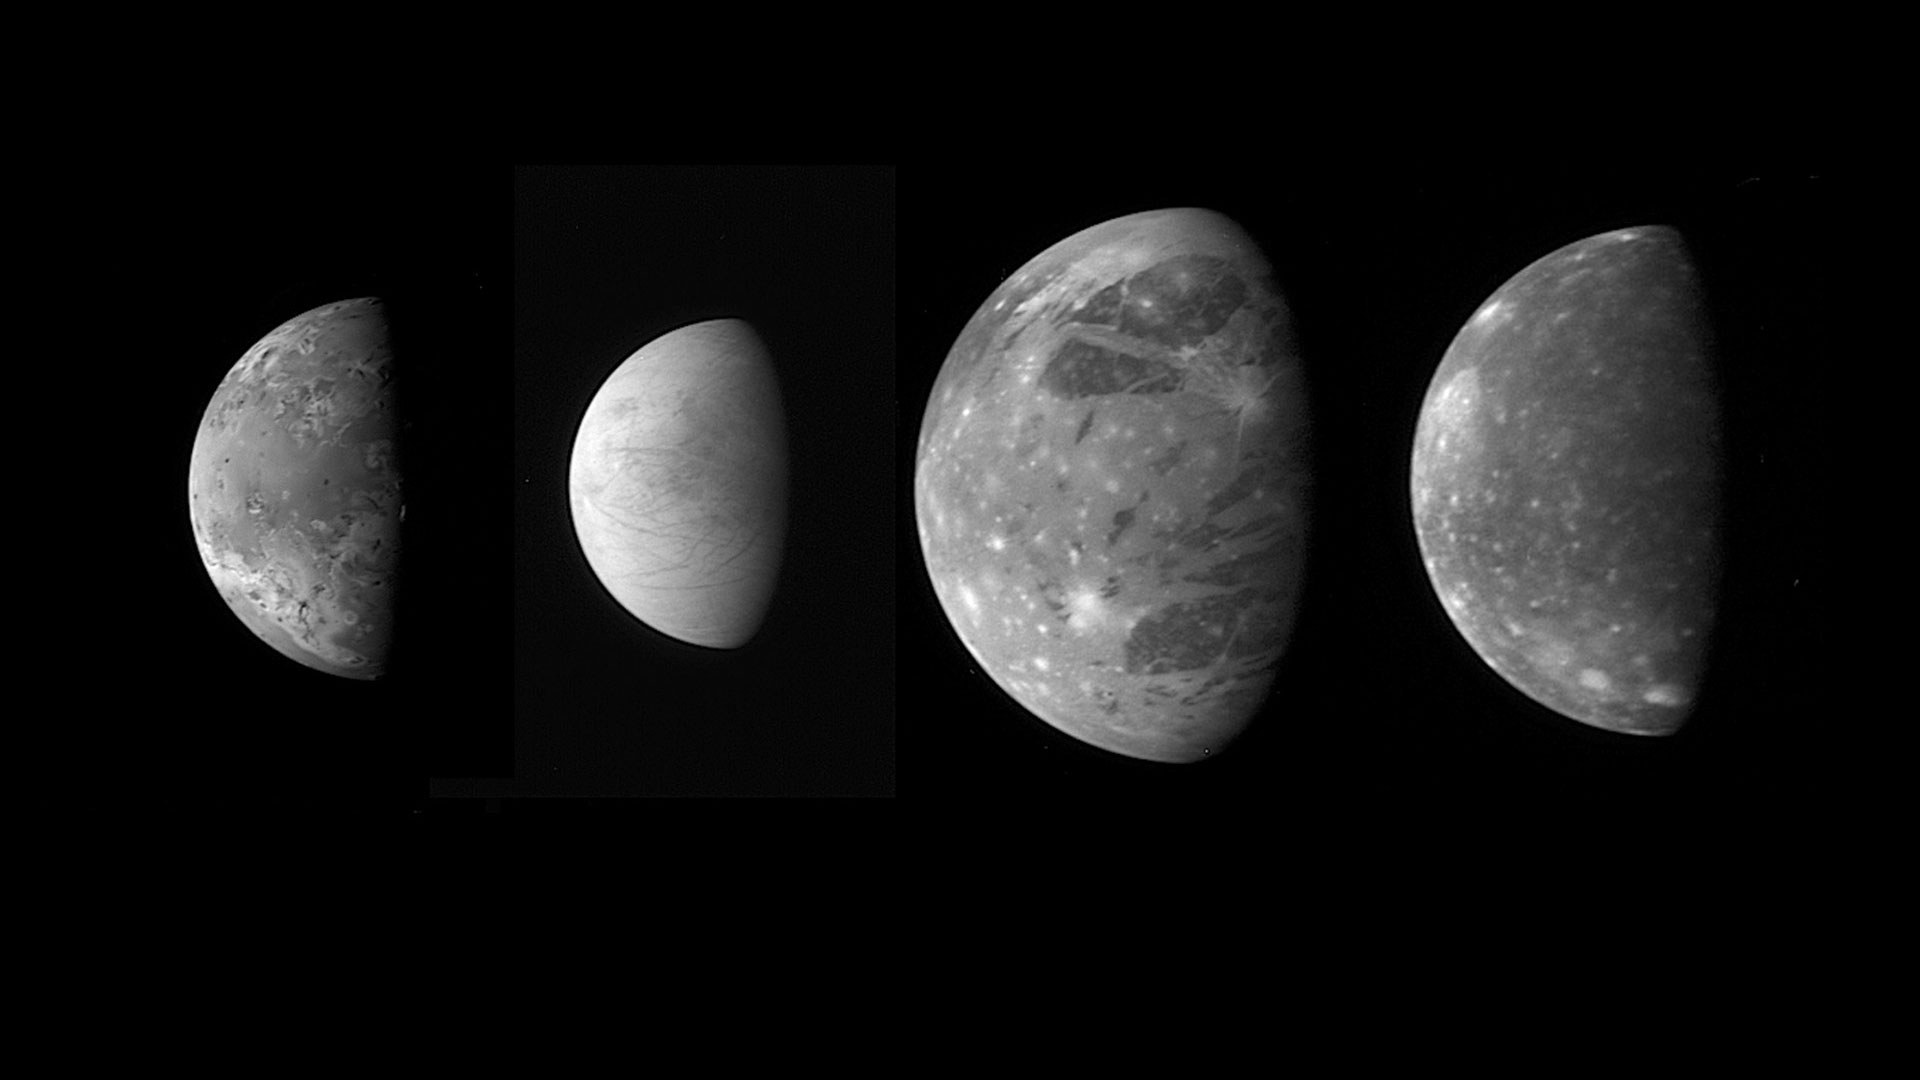 'Family photo' of the Galilean moons